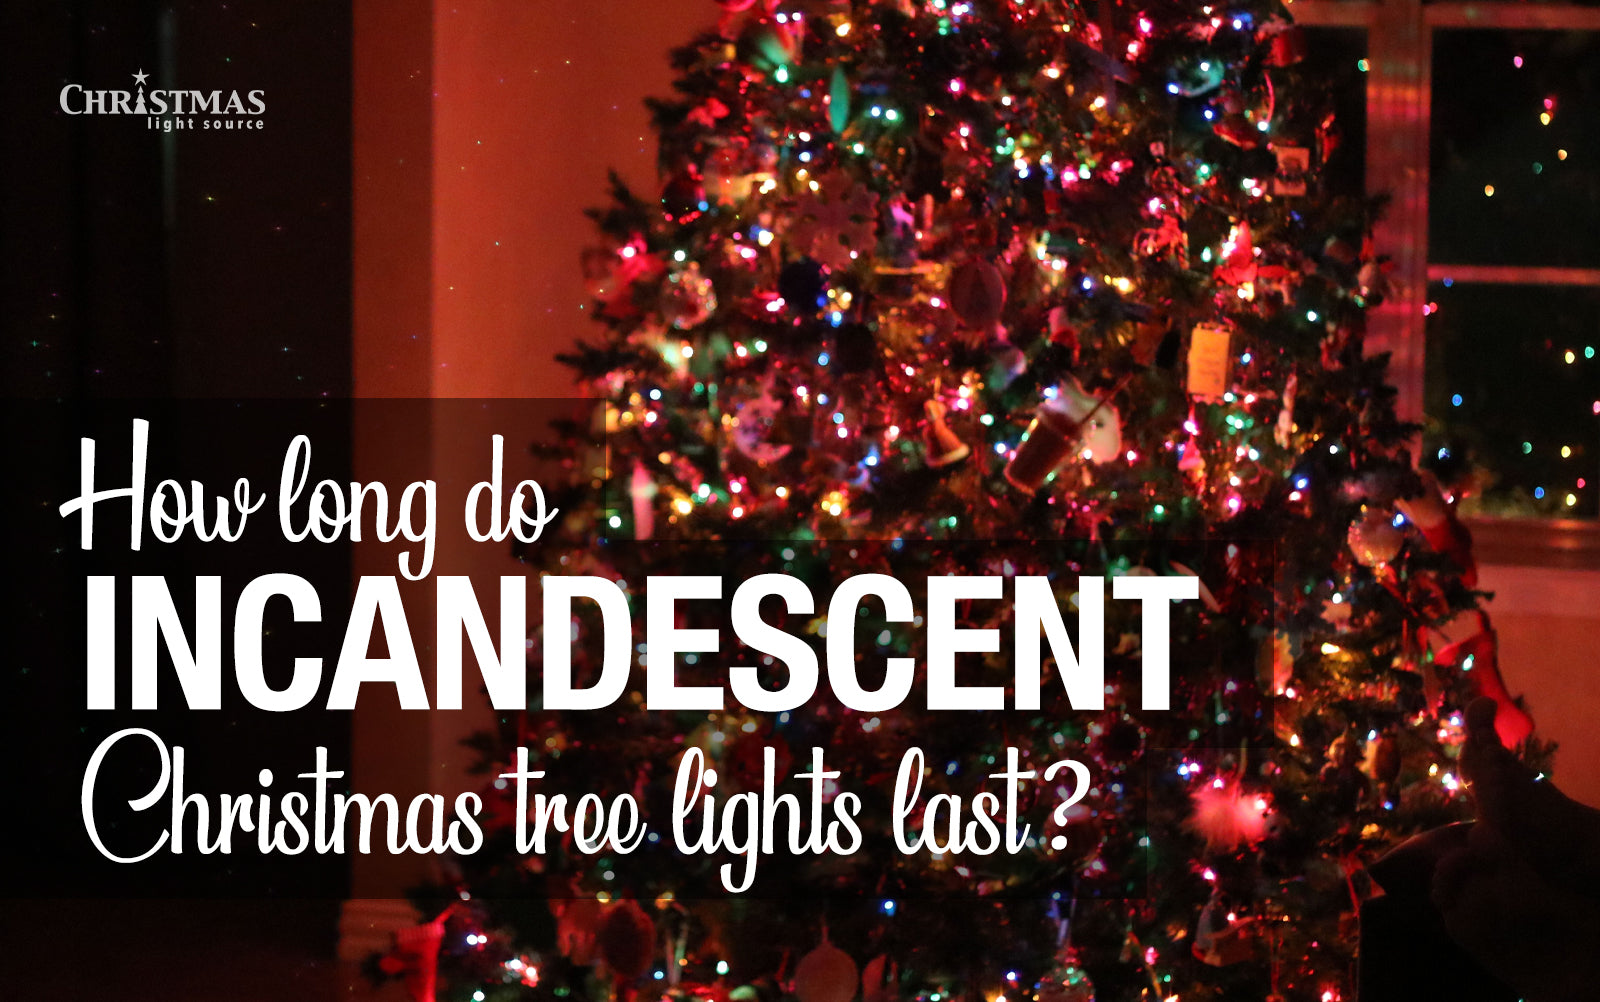 How long do incandescent Christmas tree lights last?